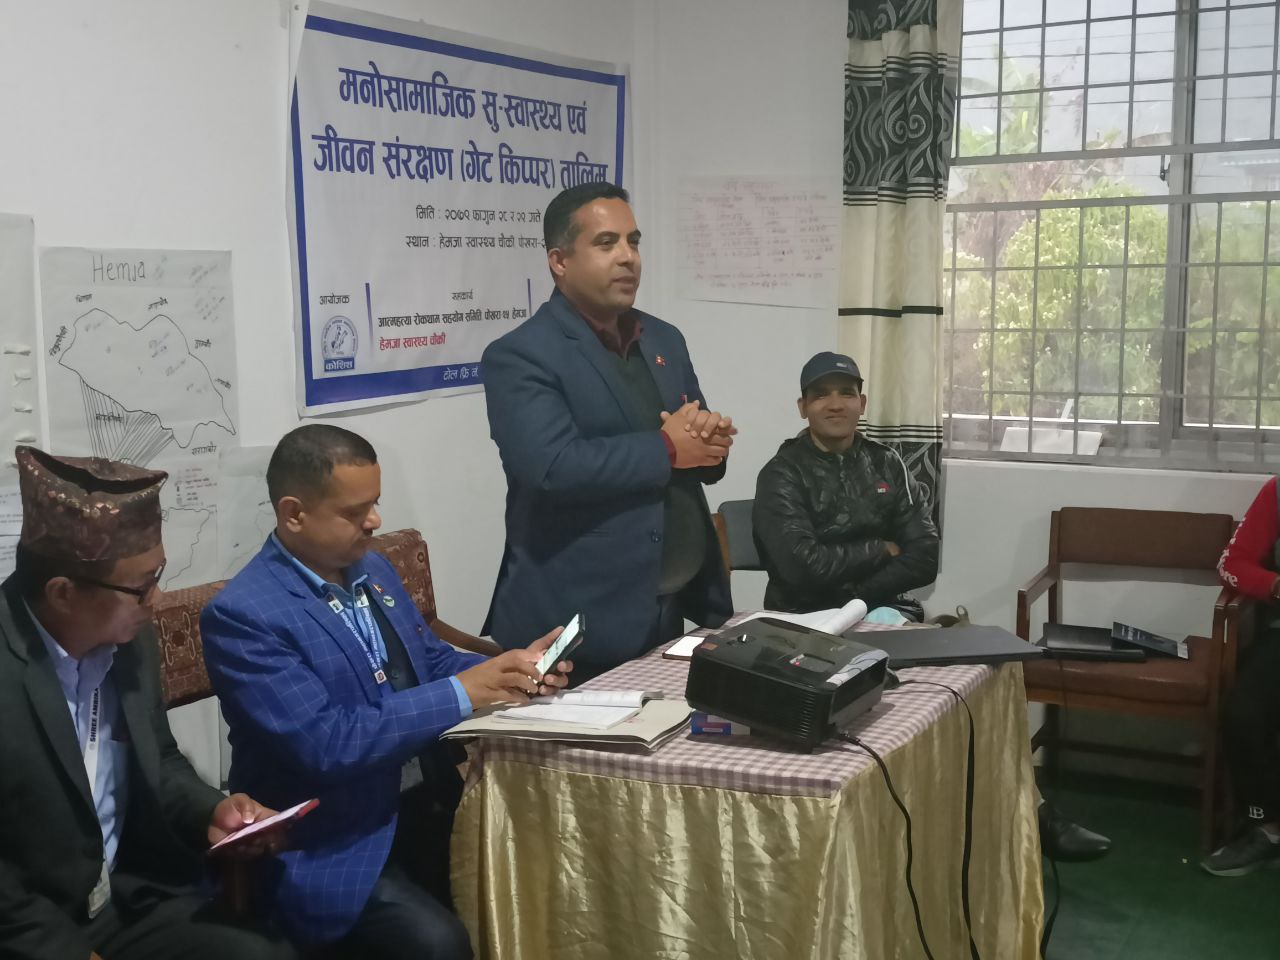 Training on Psychosocial Well-Being and Life Protection (Gatekeeper) Conducted in Hemja